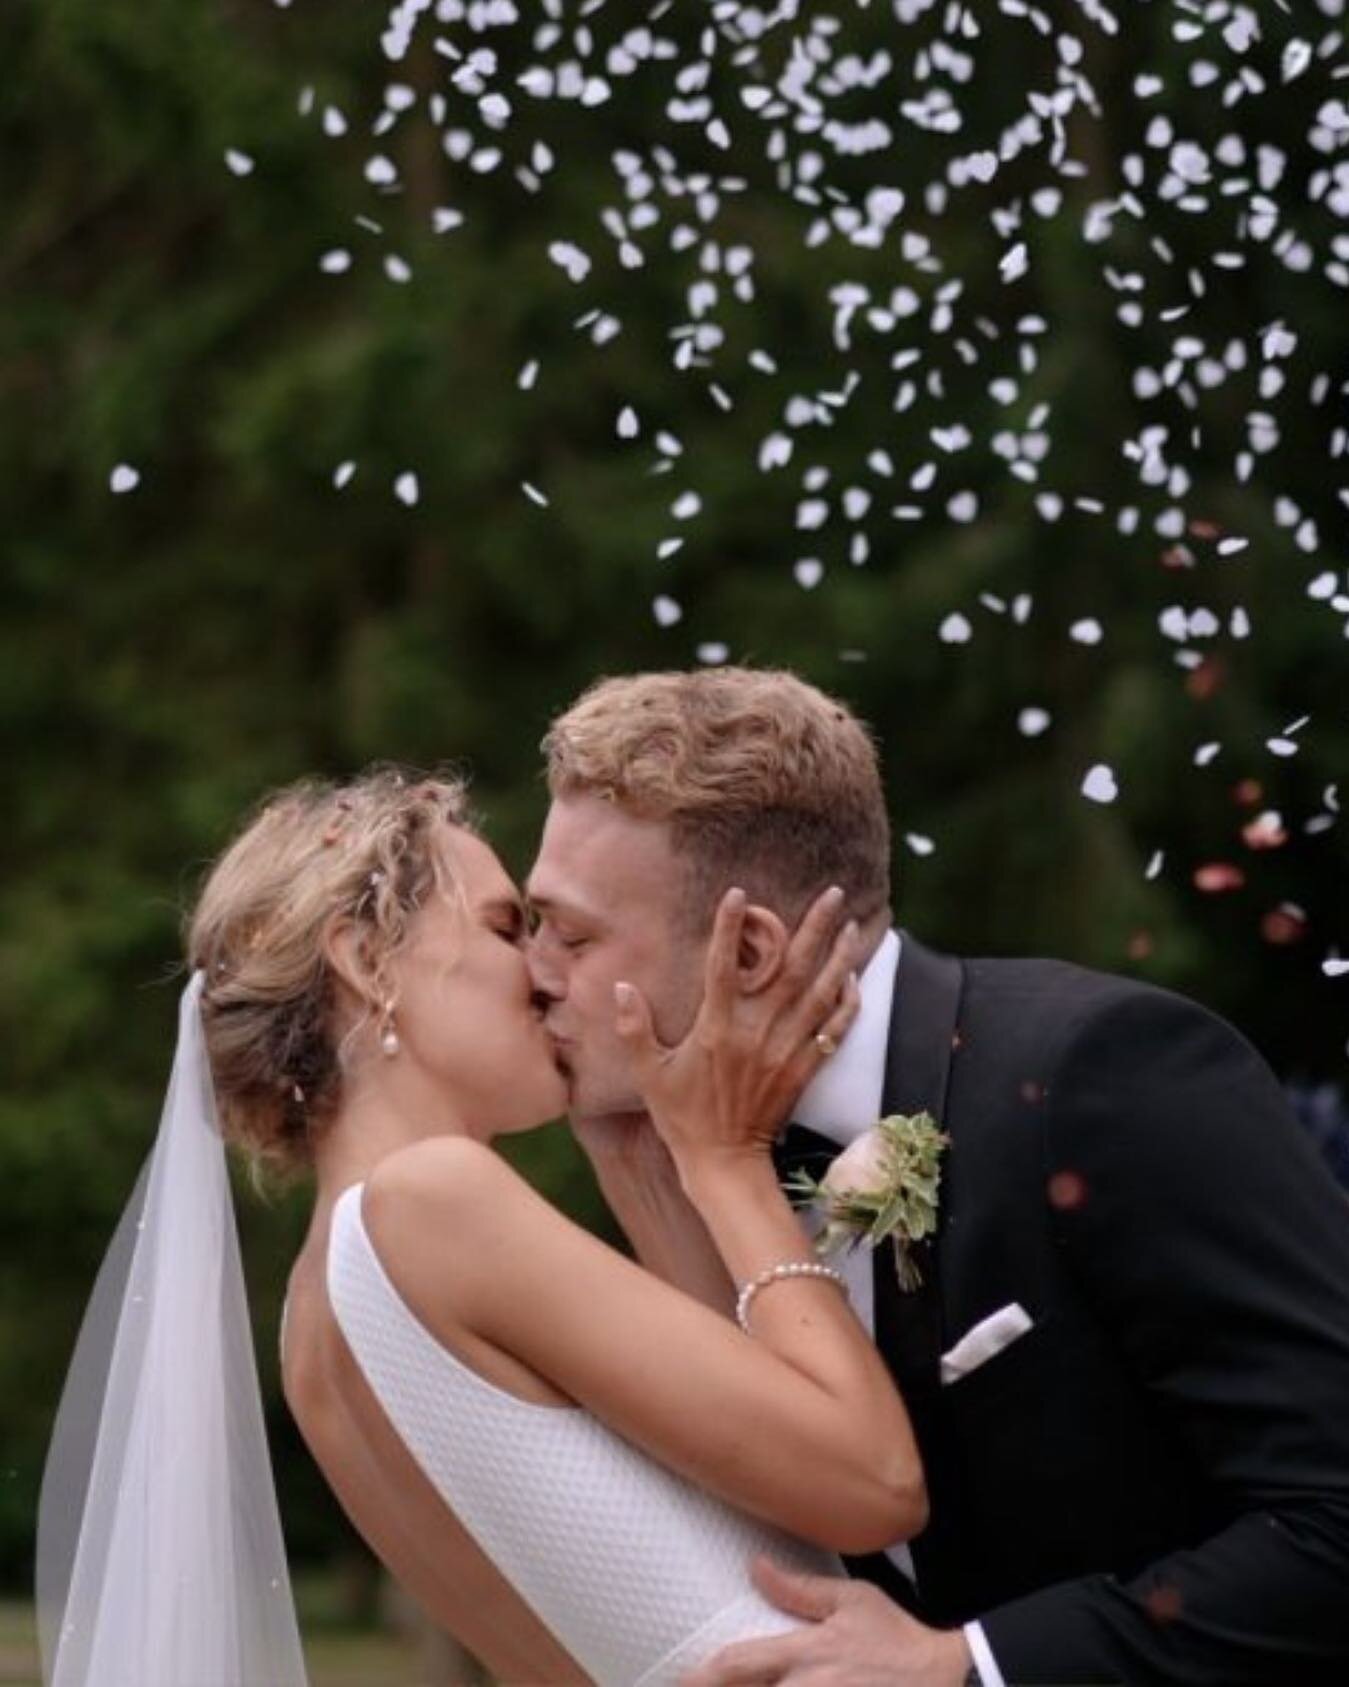 💋 Sealed with a kiss 💋 

And a round of applause from your family &amp; friends 👏 

The first kiss for newlyweds is a magical and unforgettable moment at every wedding. 

Whilst you enjoy the special moments of your wedding day, our professional a